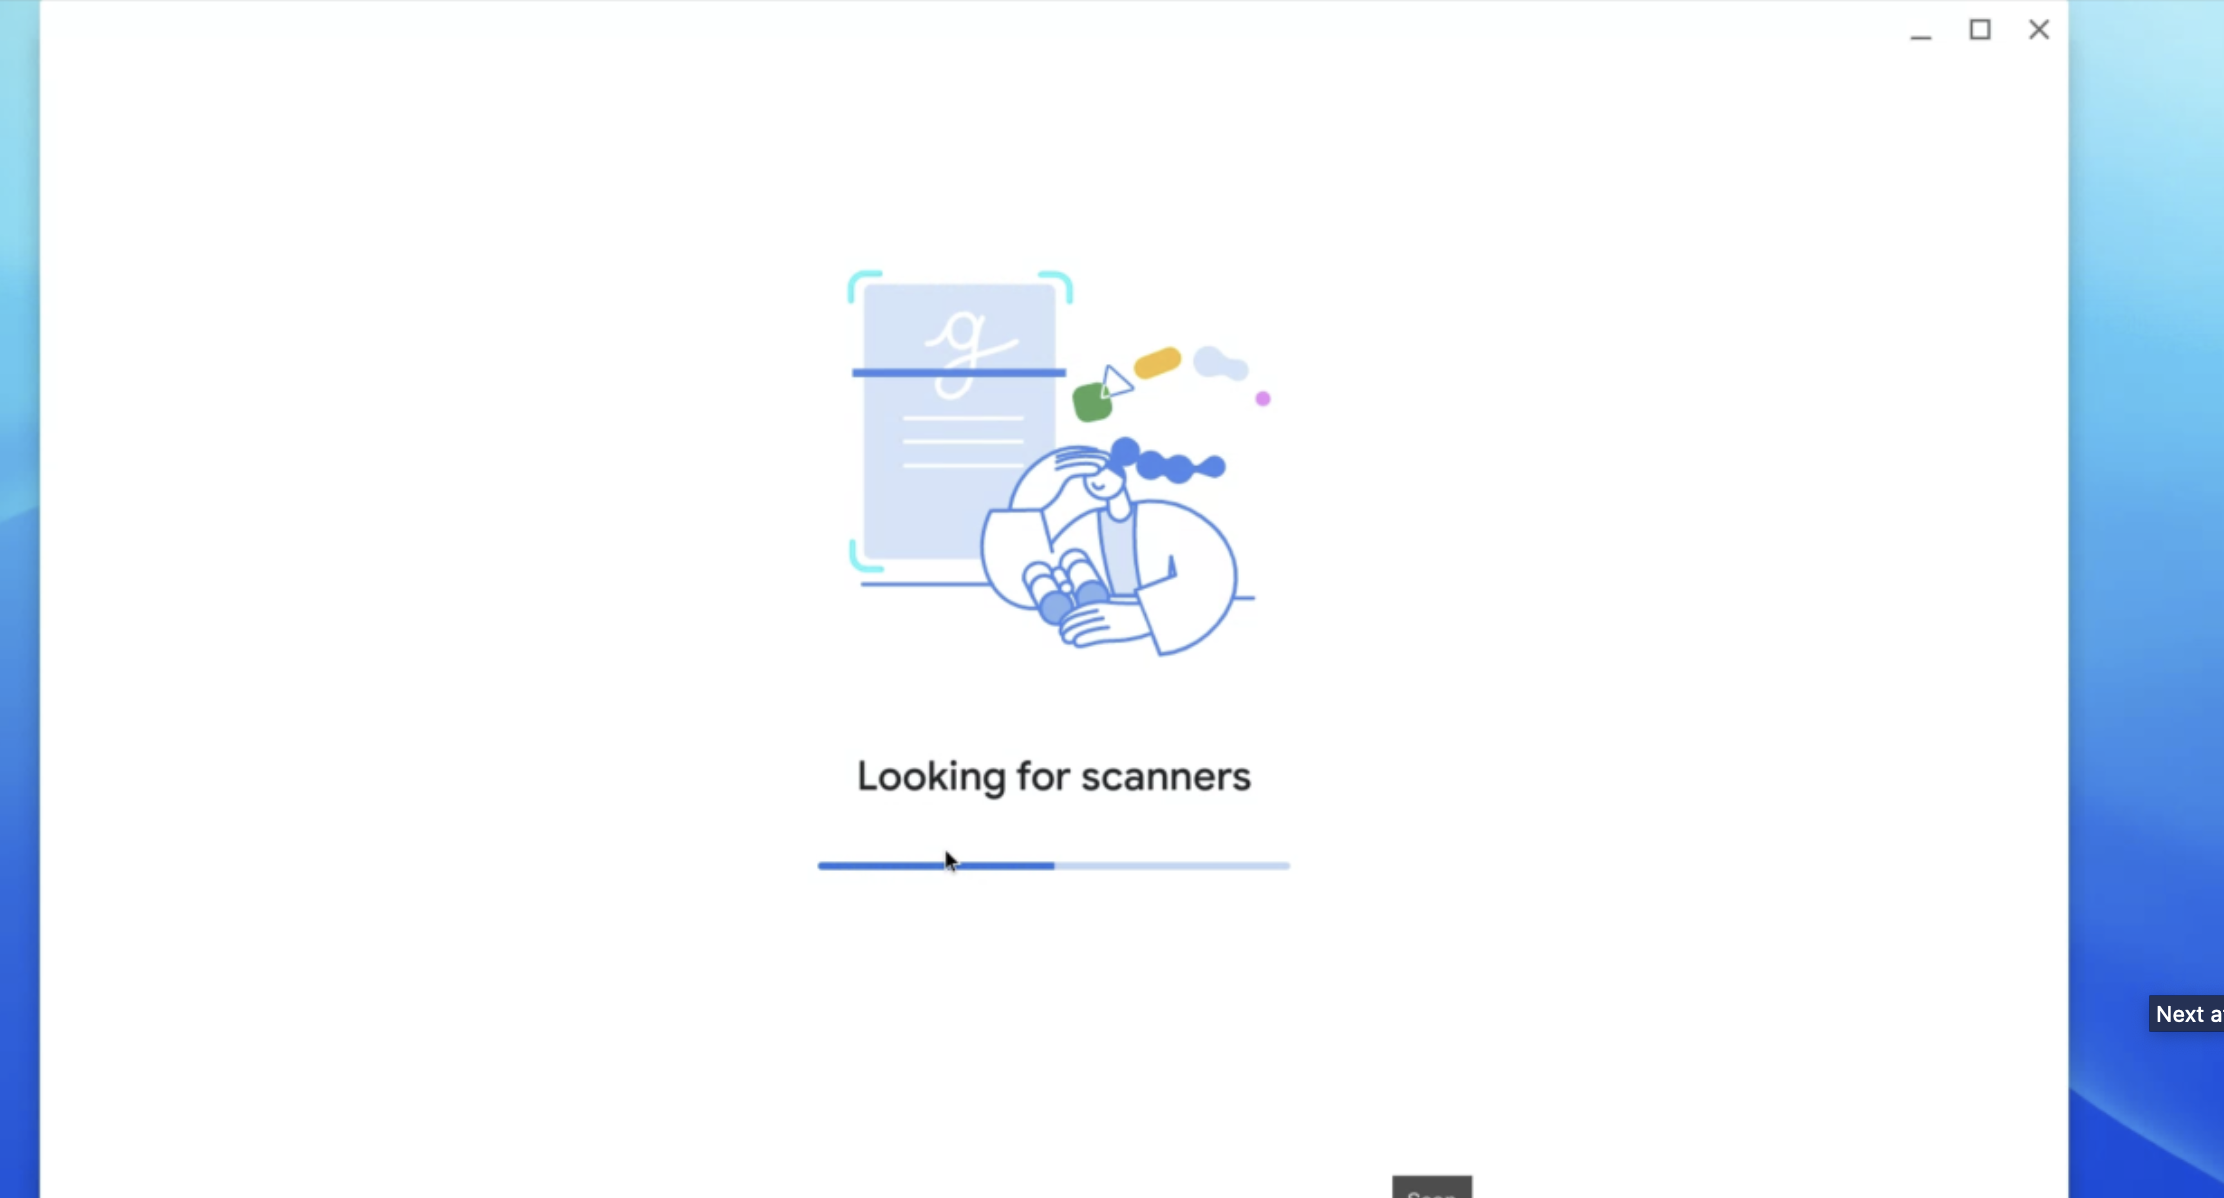 Chromebook scan software searches for scanners